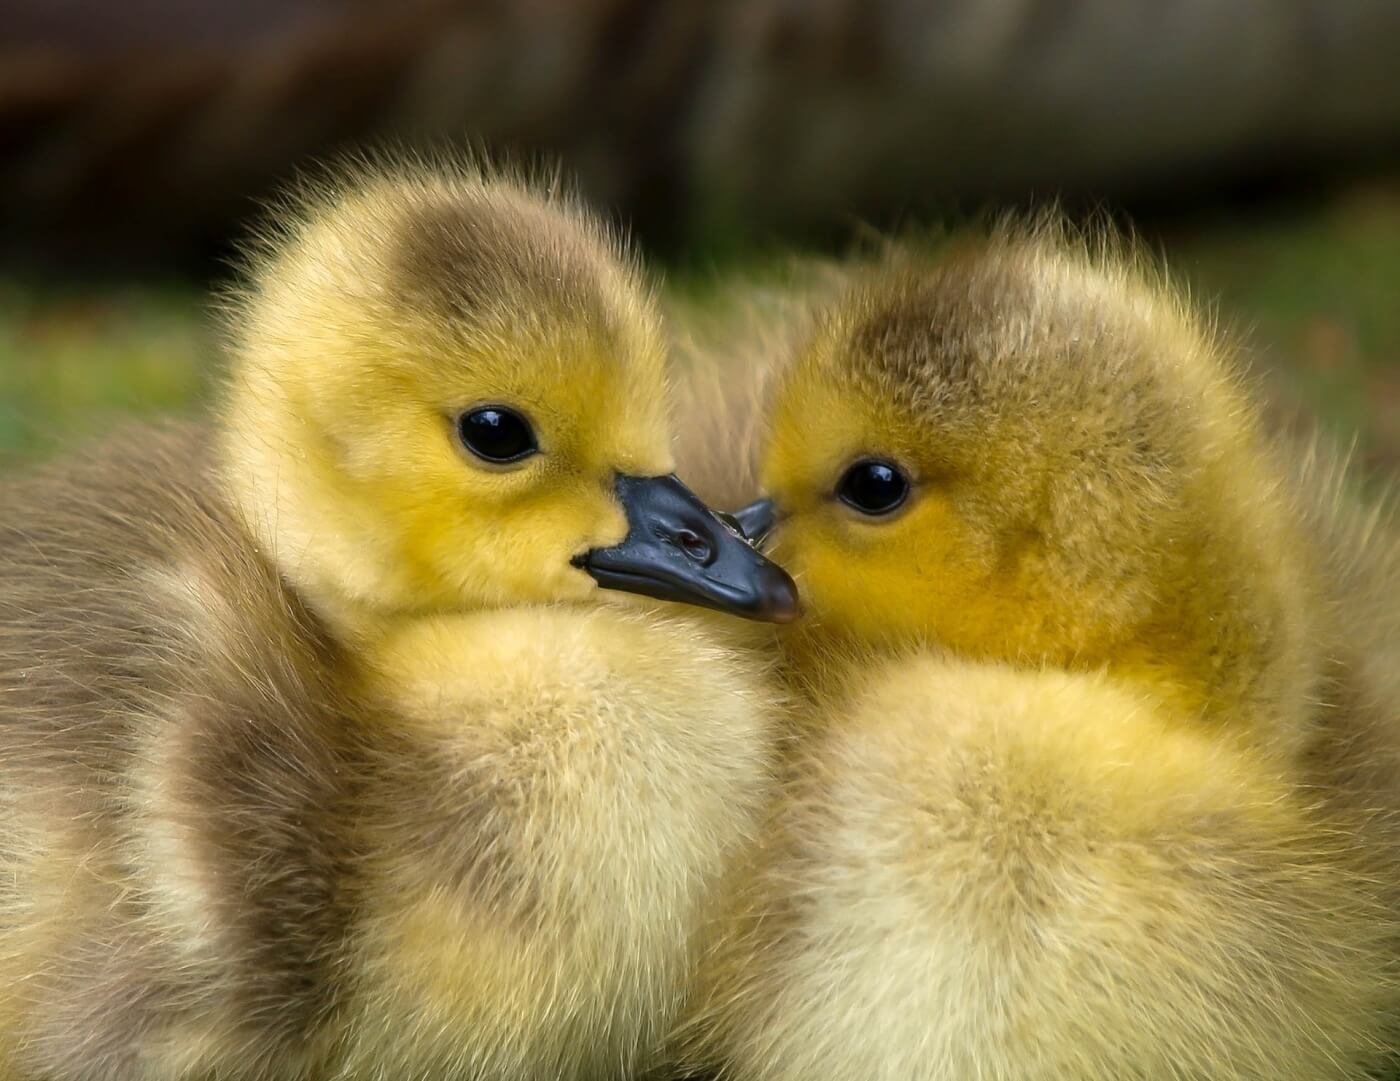 10 Facts About Ducks That Might Surprise You